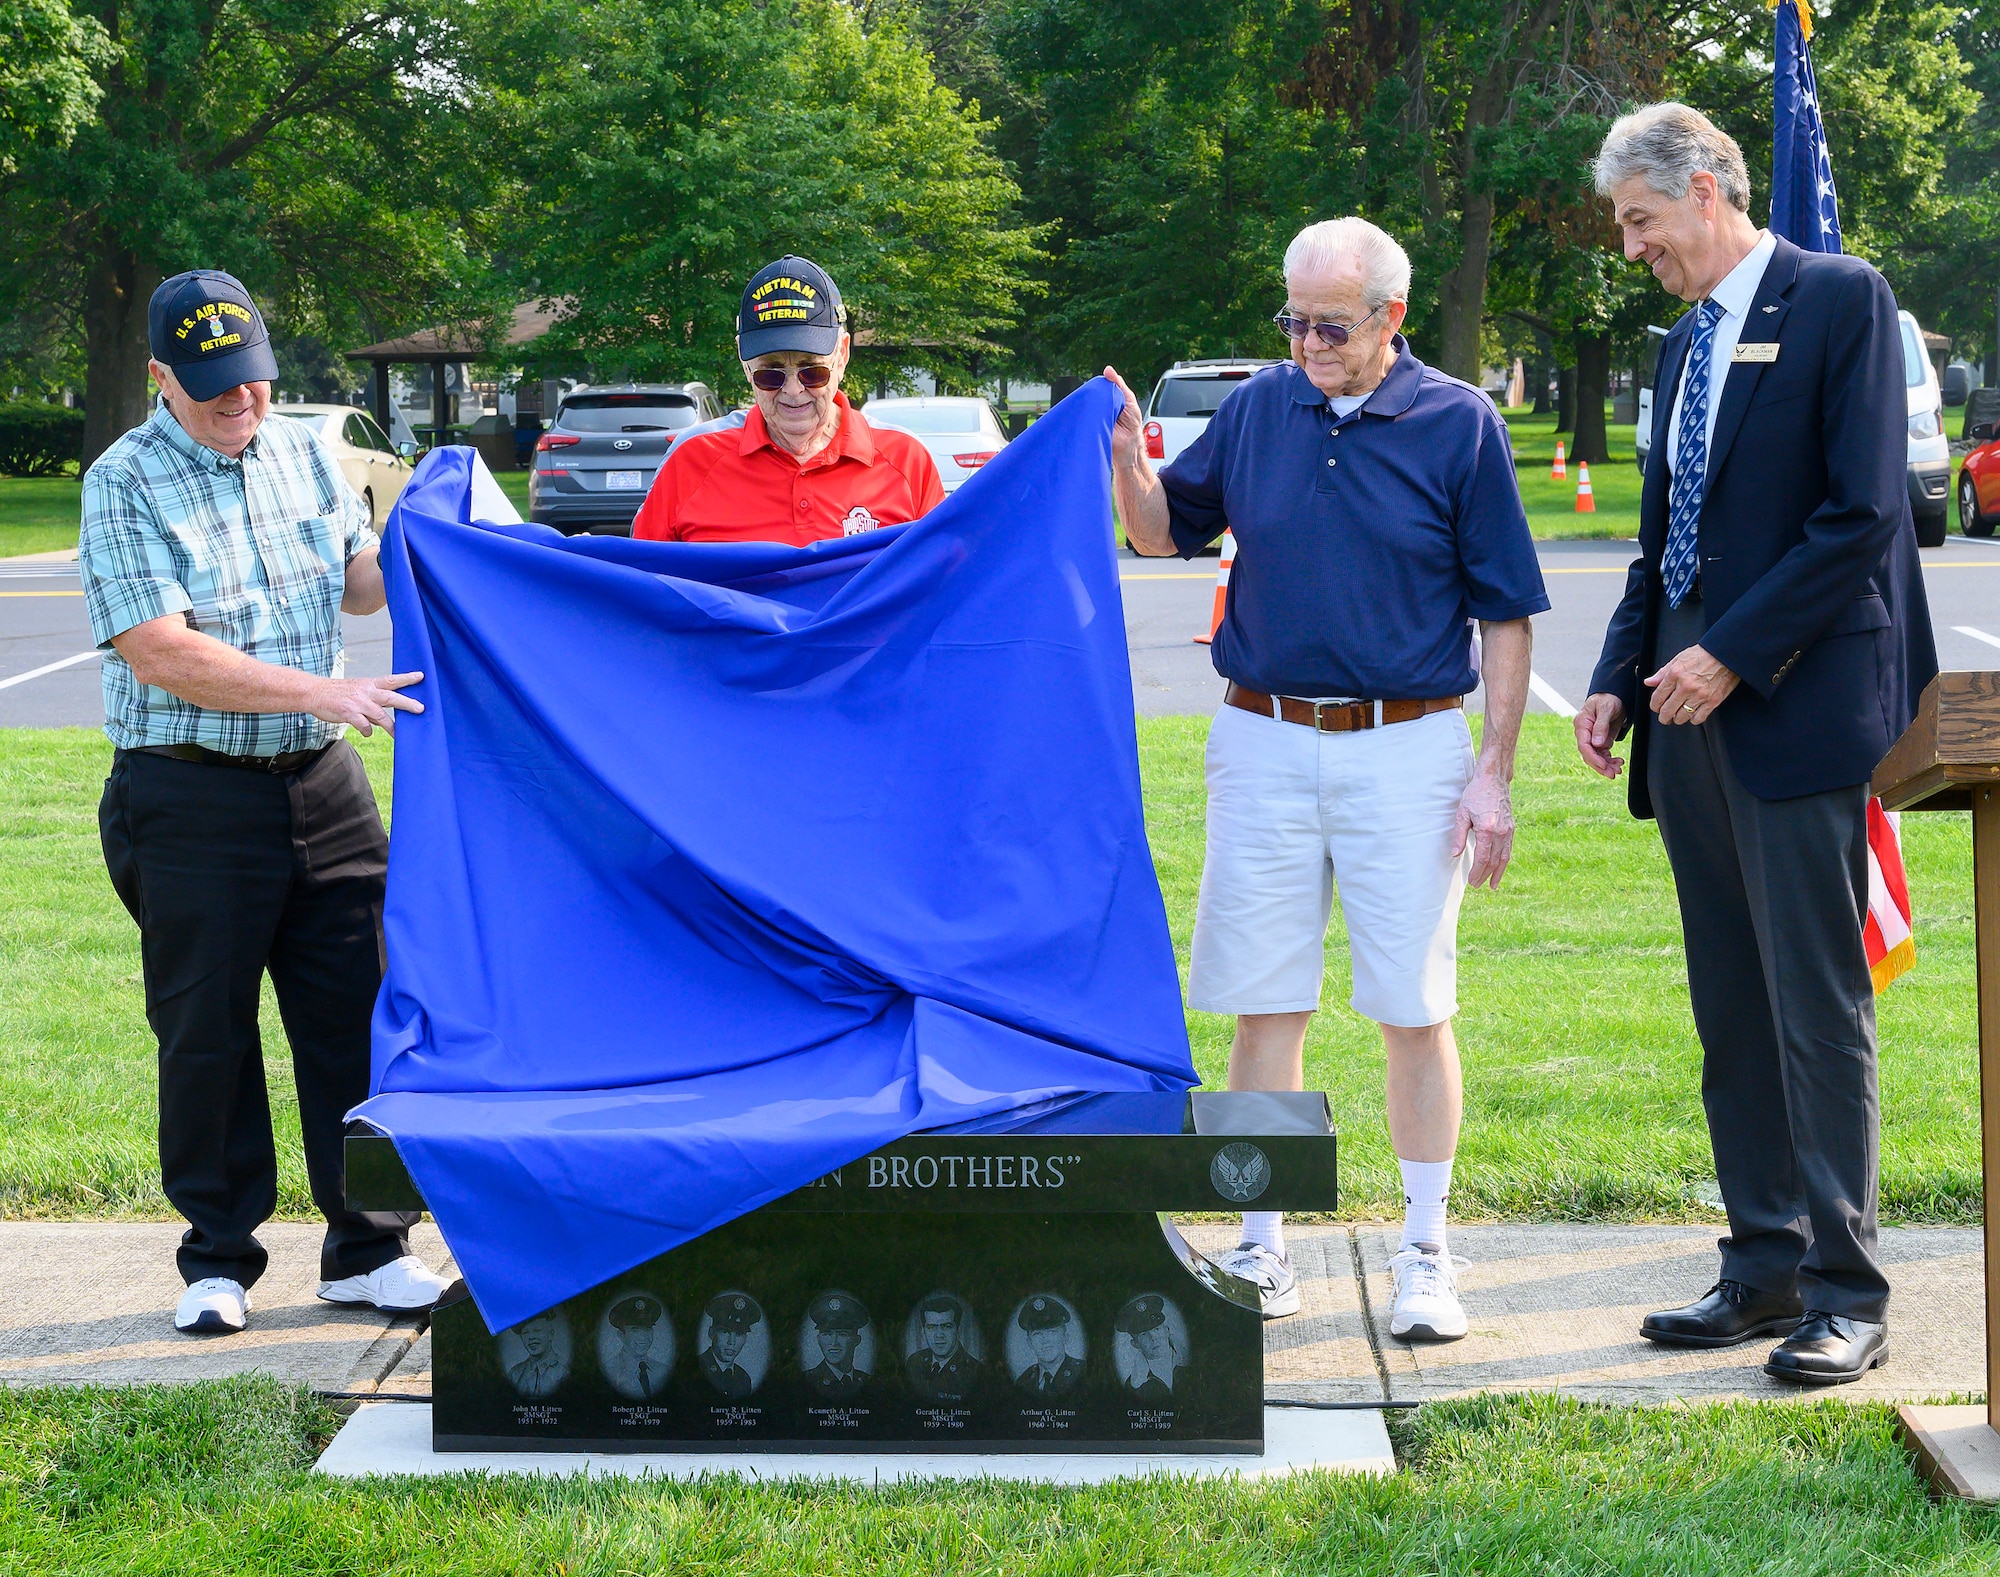 Steve (left), Larry (center) and Jerry Litten unveil a memorial bench honoring their brothers and them during a ceremony July 20, 2021, at the National Museum of the Air Force, Wright-Patterson Air Force Base, Ohio. The three, along with four other brothers, served a combined total of 137 years in the U.S. Air Force. (U.S. Air Force photo by R.J. Oriez)